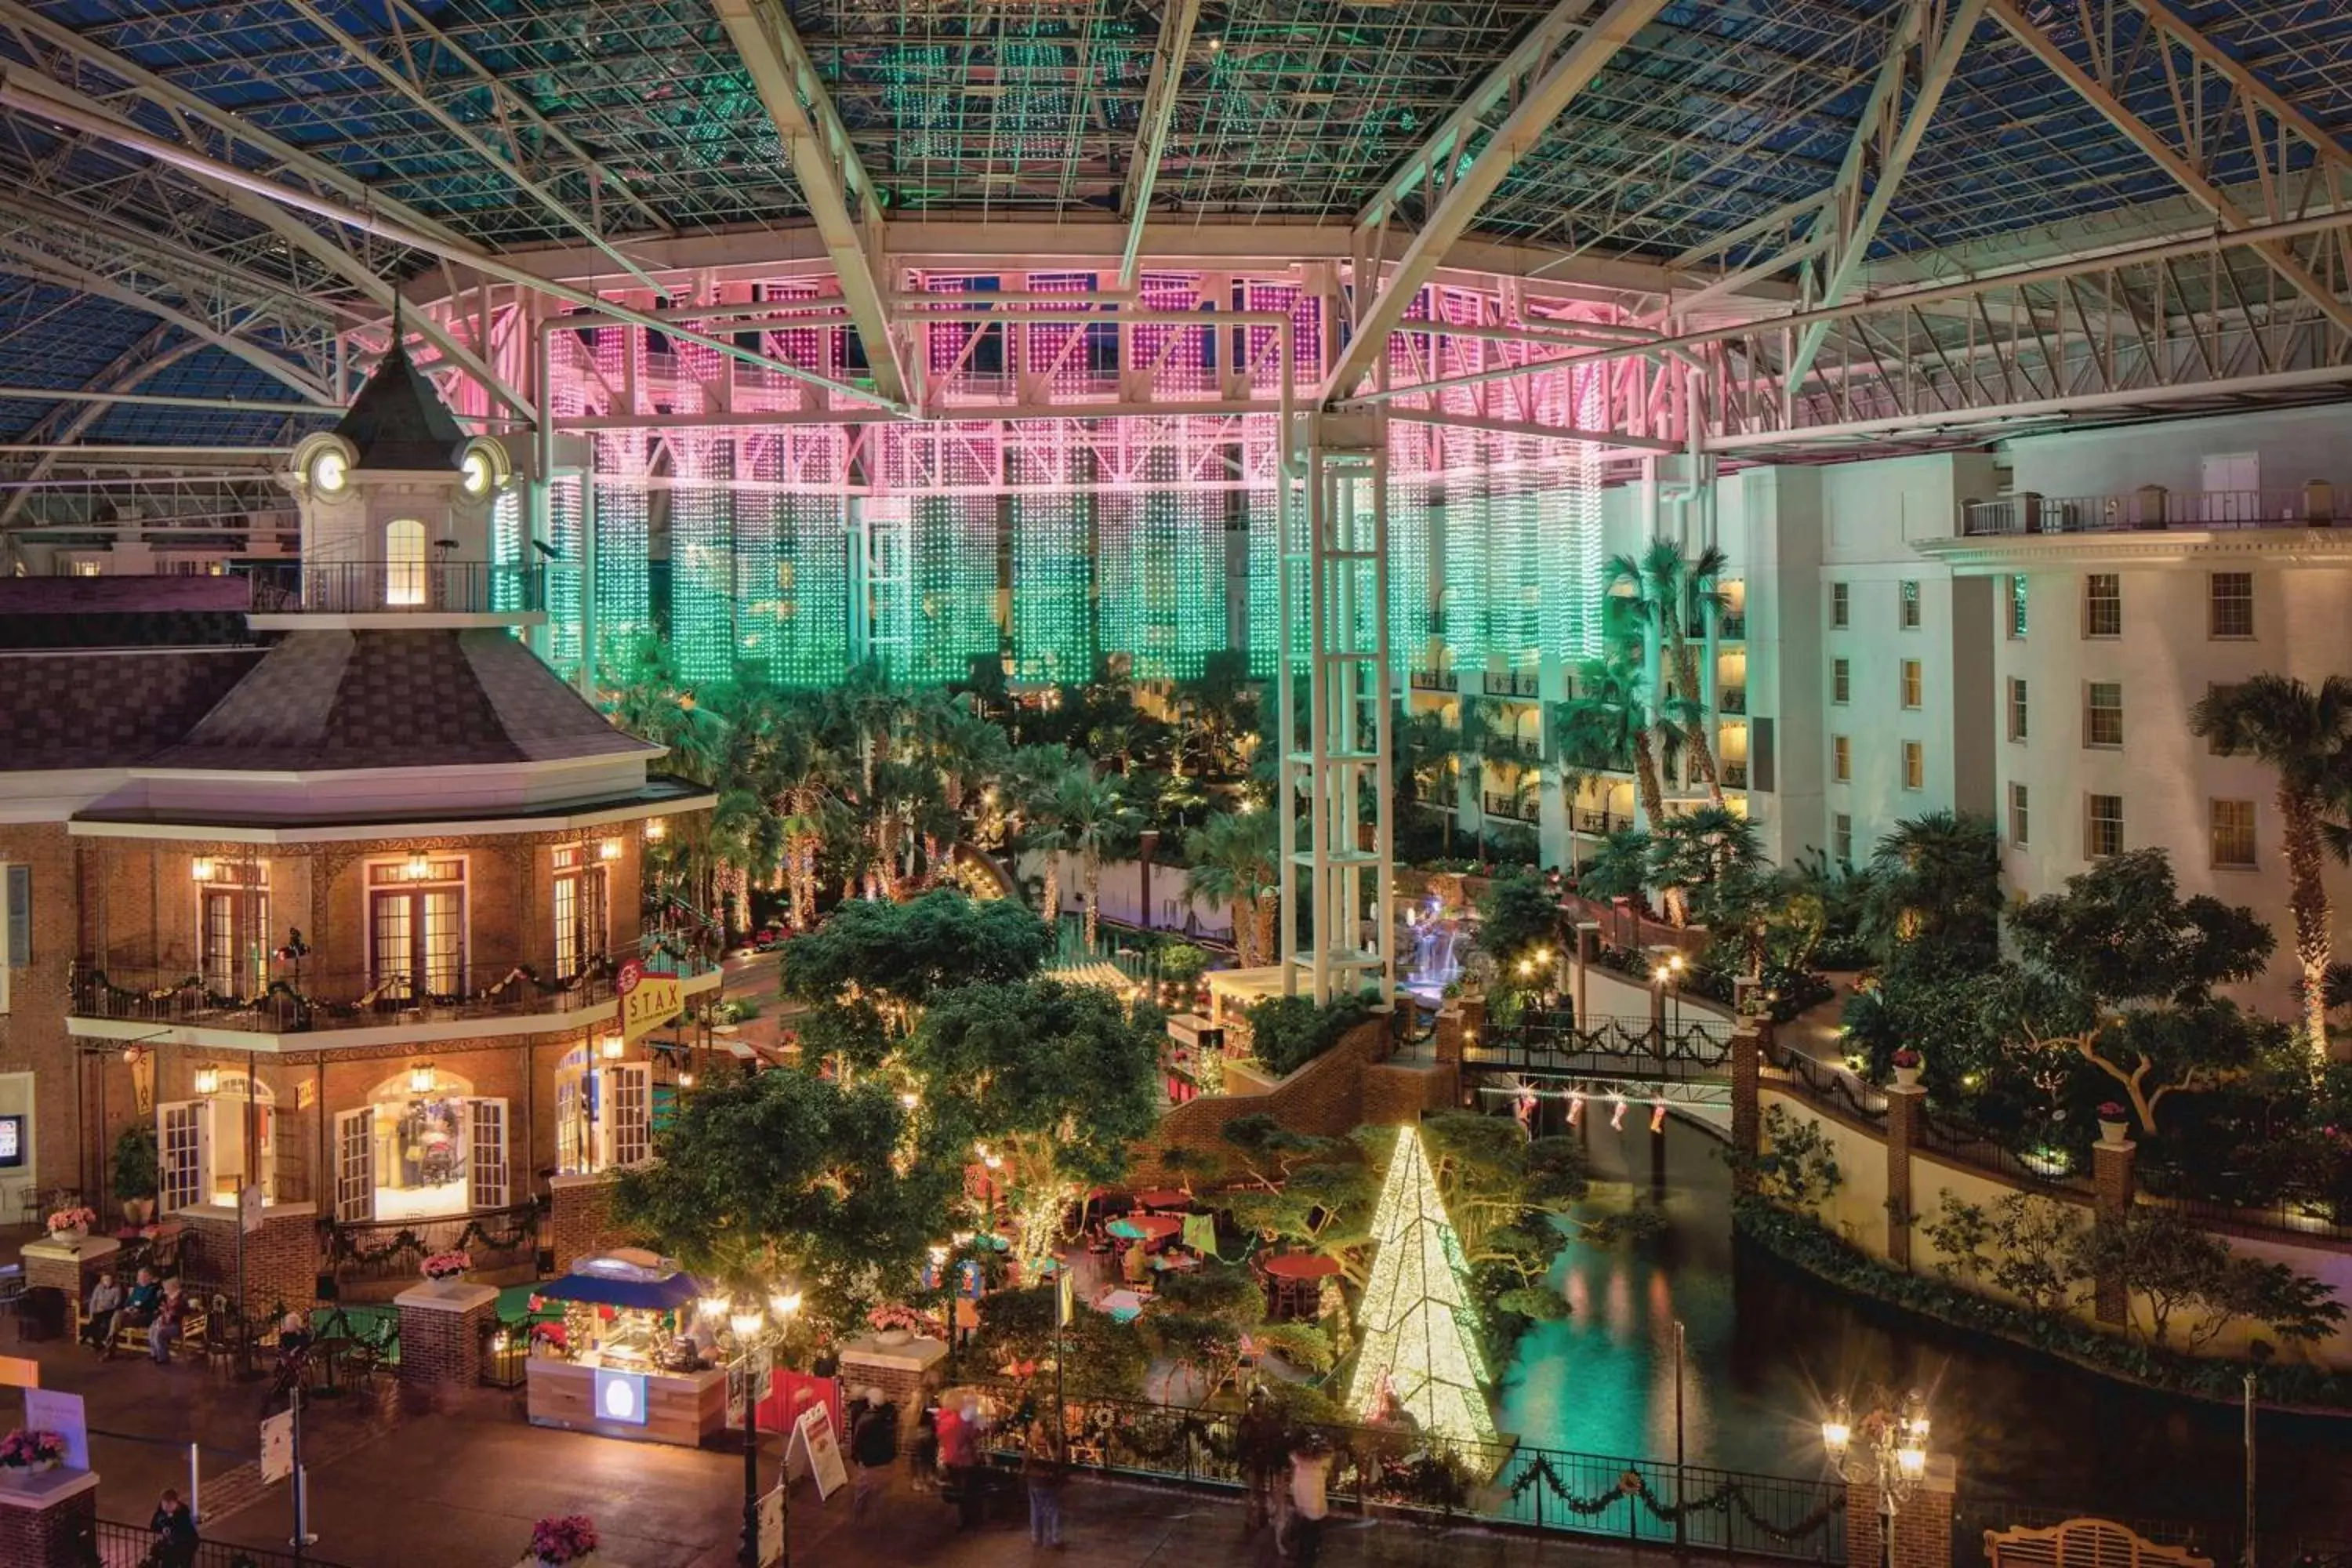 Property building in Gaylord Opryland Resort & Convention Center